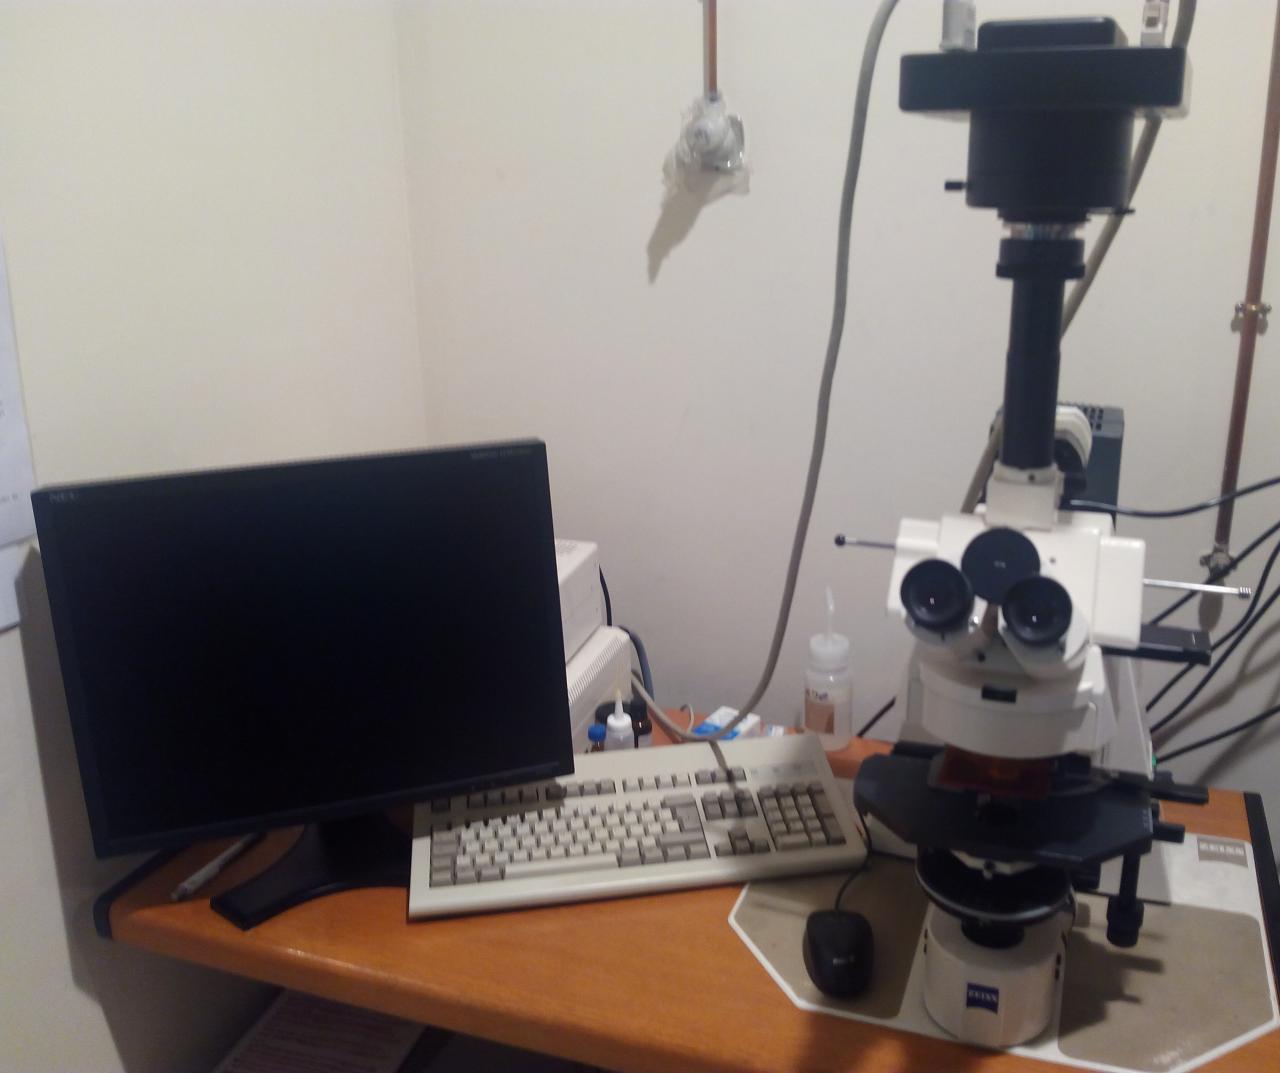 FLUORESCENCE AND WIDE FIELD OPTICAL MICROSCOPE WITH DIGITAL CAMERAS (AXIOPLAN-2, Zeiss)